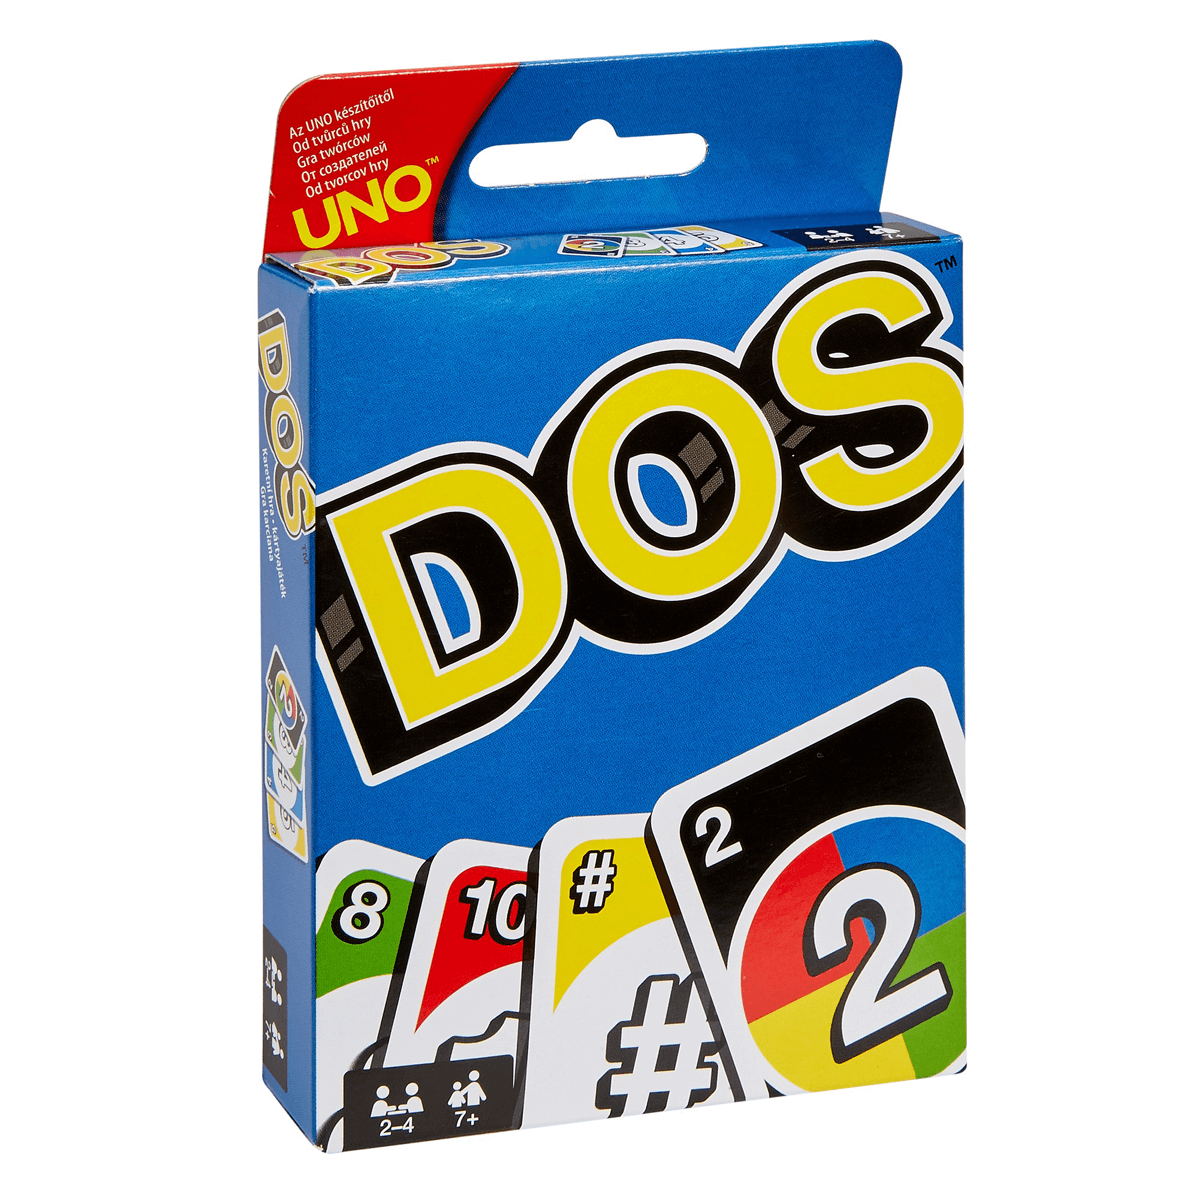 Uno Dos Card Game The Entertainer